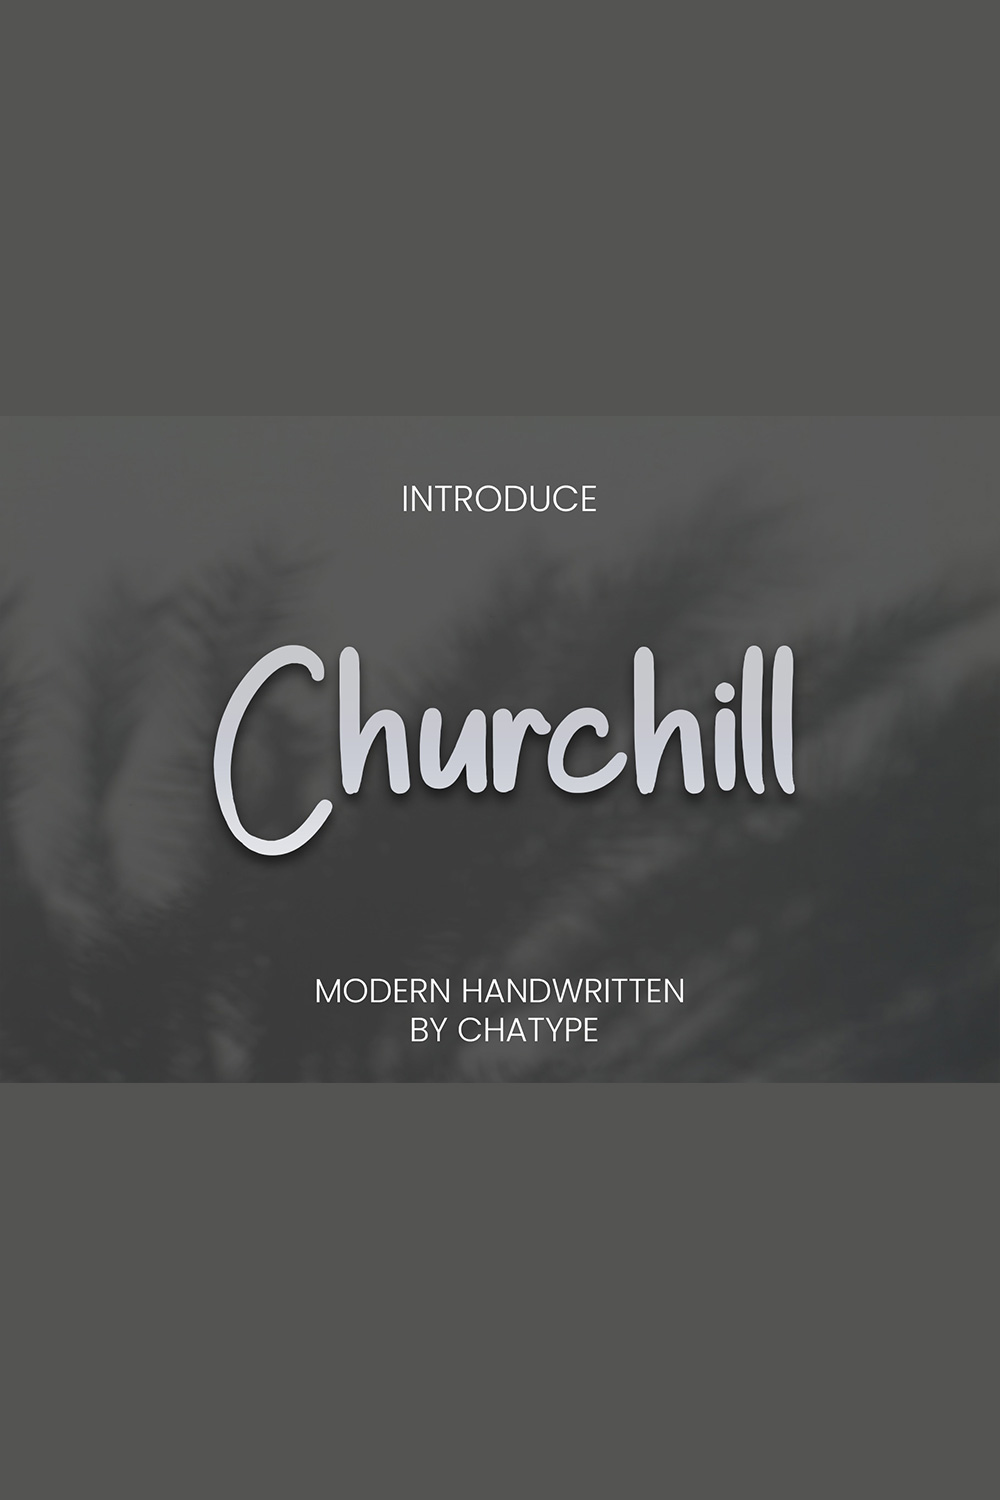 An image with text showing off the irresistible Churchill typeface